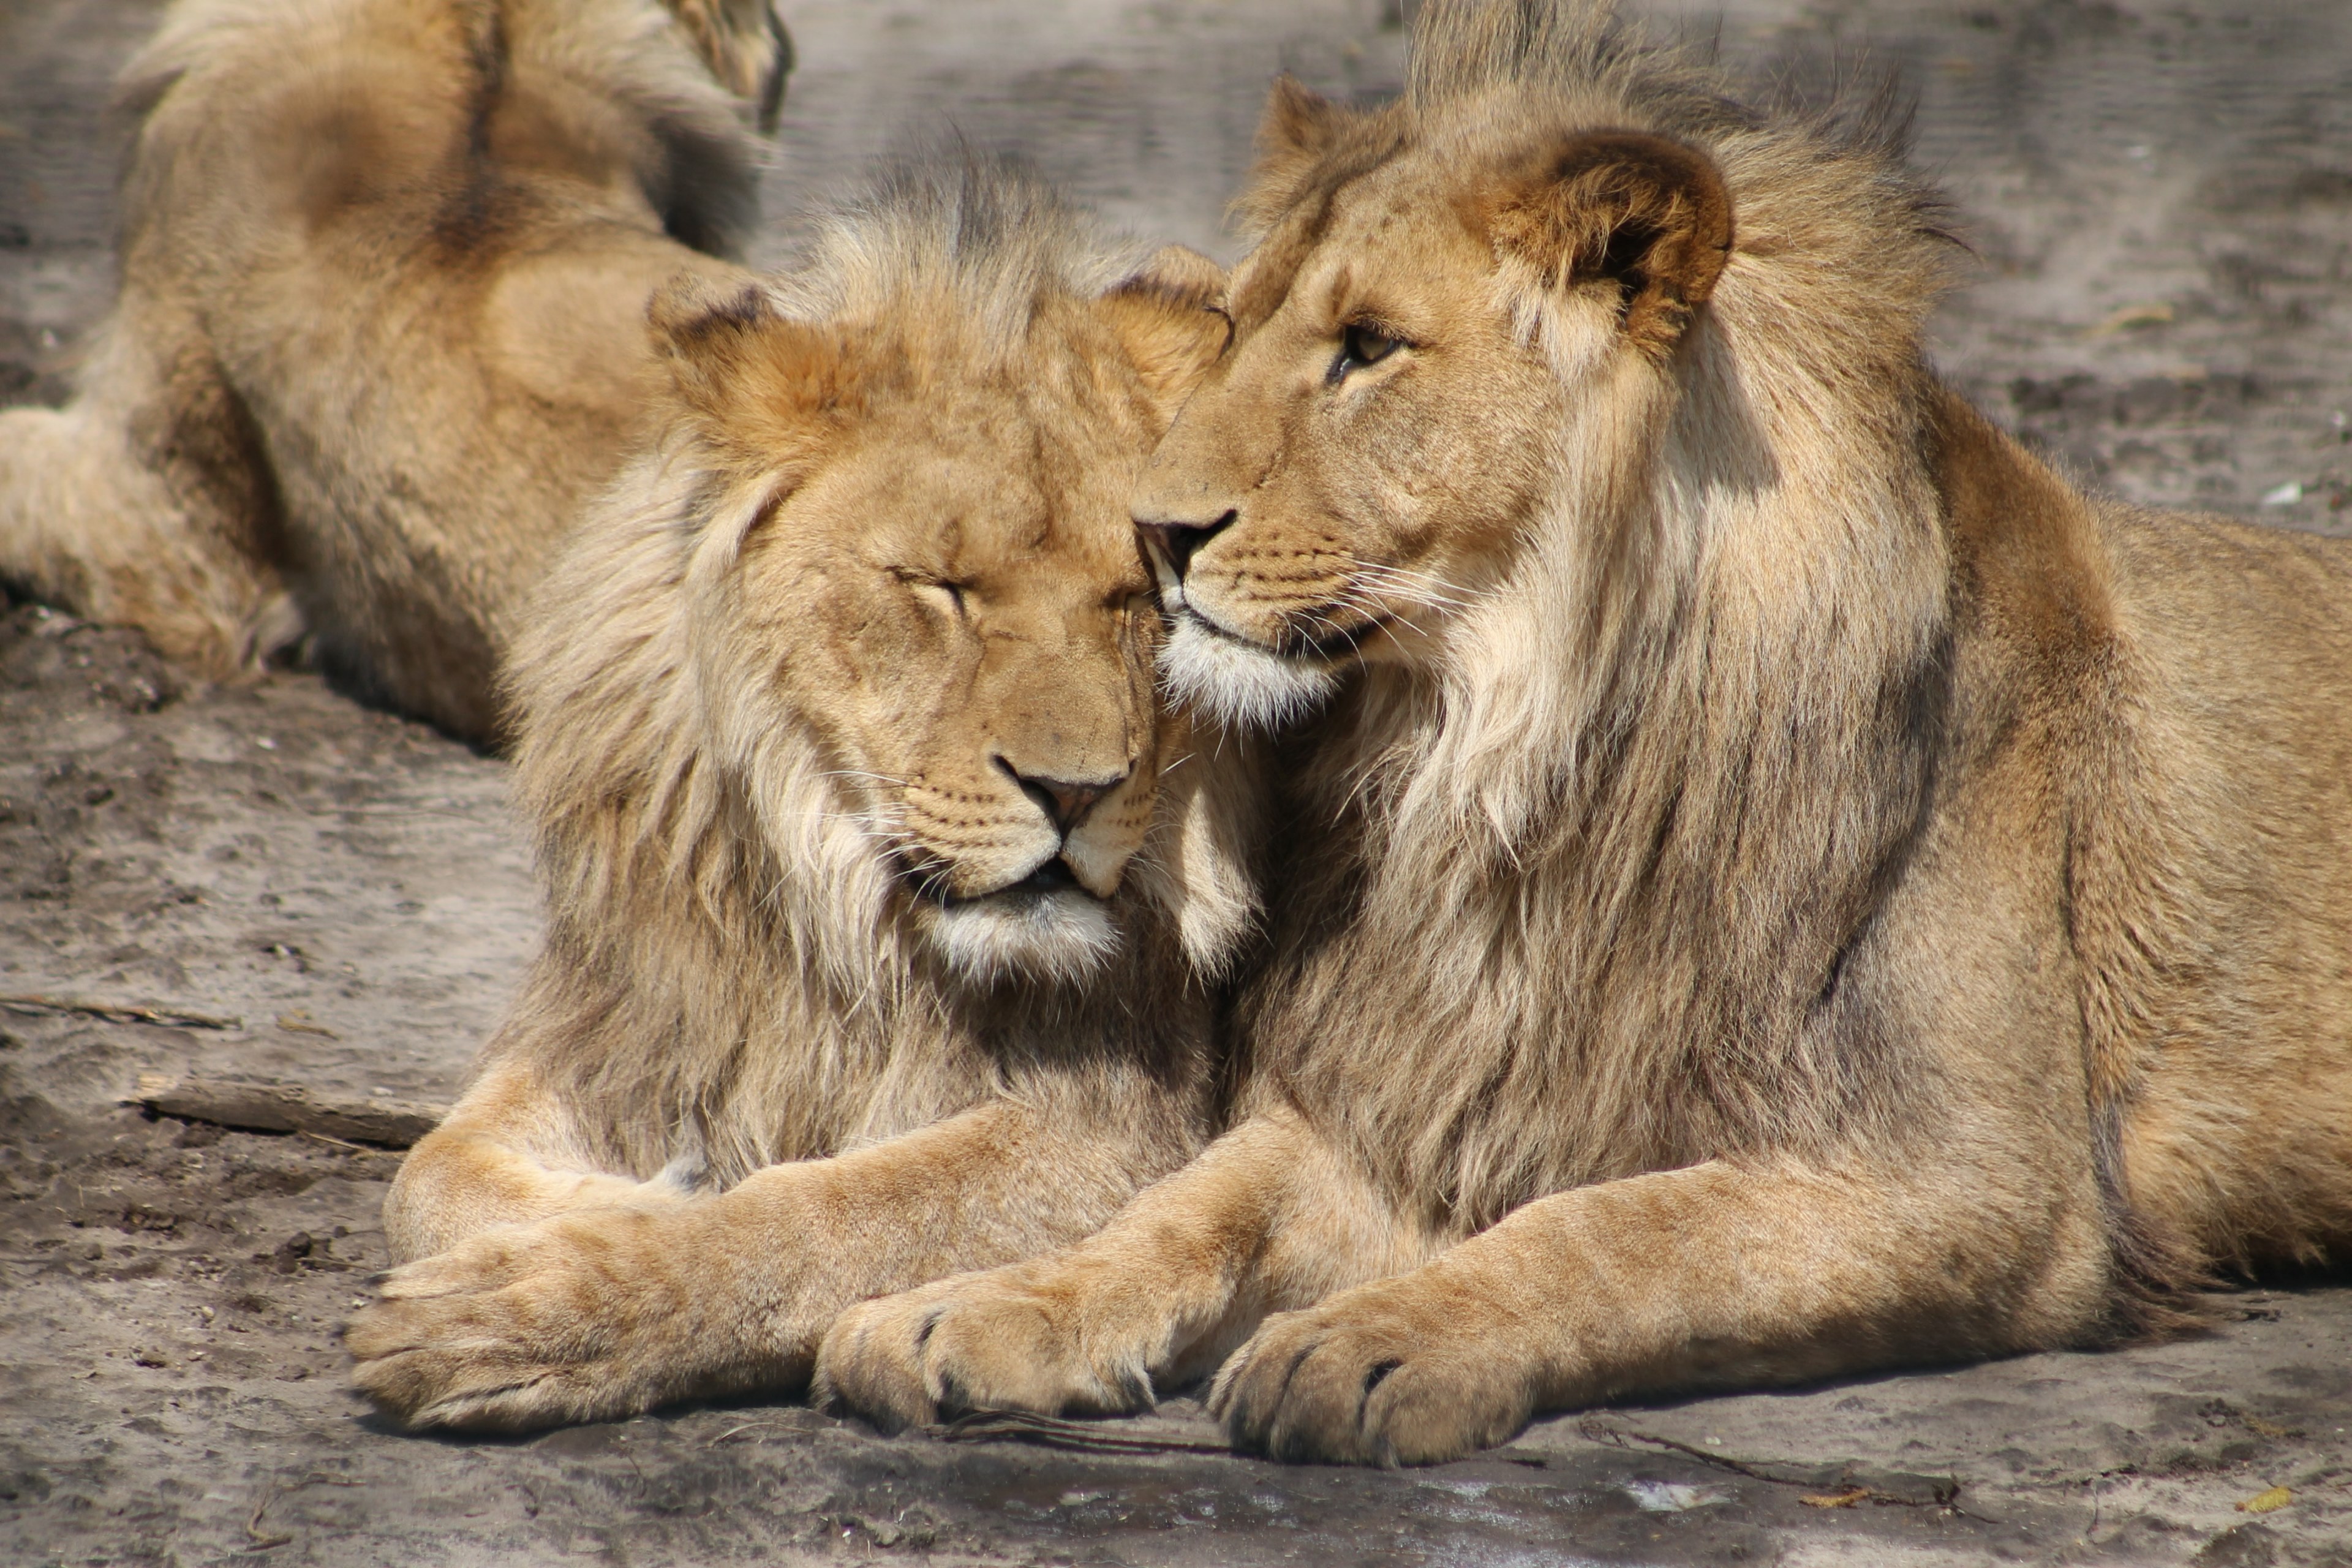 Wallpaper / two lions snuggling up to each other in zoo parc overloon, lion friendship 4k wallpaper